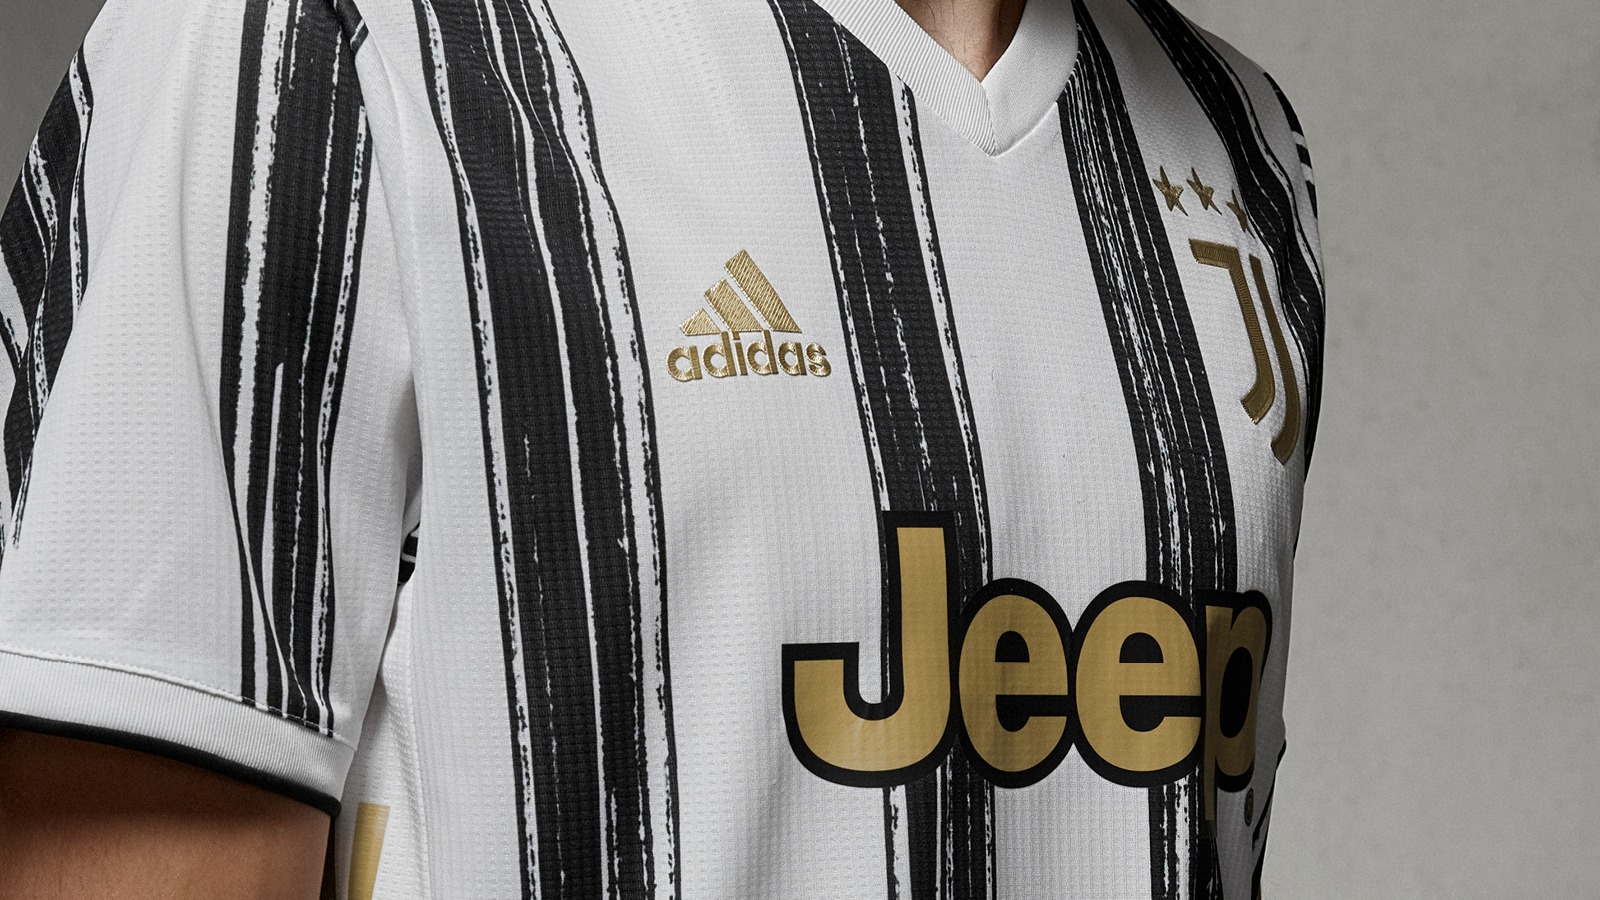 ondernemen Geestig samen JuventusFC 🇬🇧🇺🇸 on Twitter: "Elegant at home and away 🙌 The new 20/21  home &amp; away shirts by @adidasfootball. Both available on the Official Juventus  Online Store! ⚪️⚫️ https://t.co/9F06yWDfFq 🔷 https://t.co/9F06yWDfFq  #ReadyForSport #